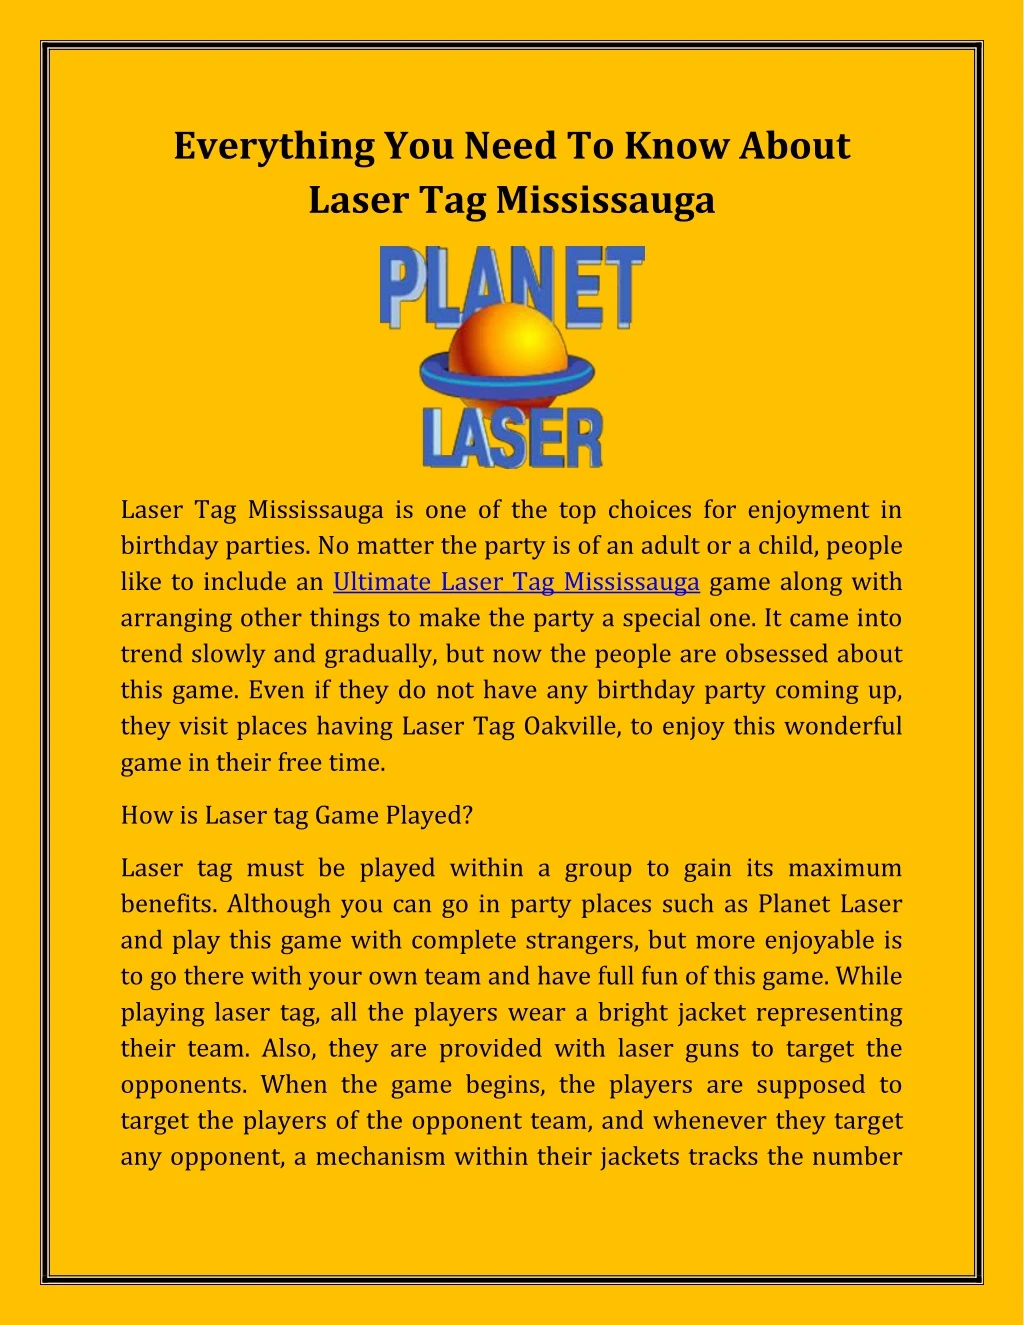 everything you need to know about laser